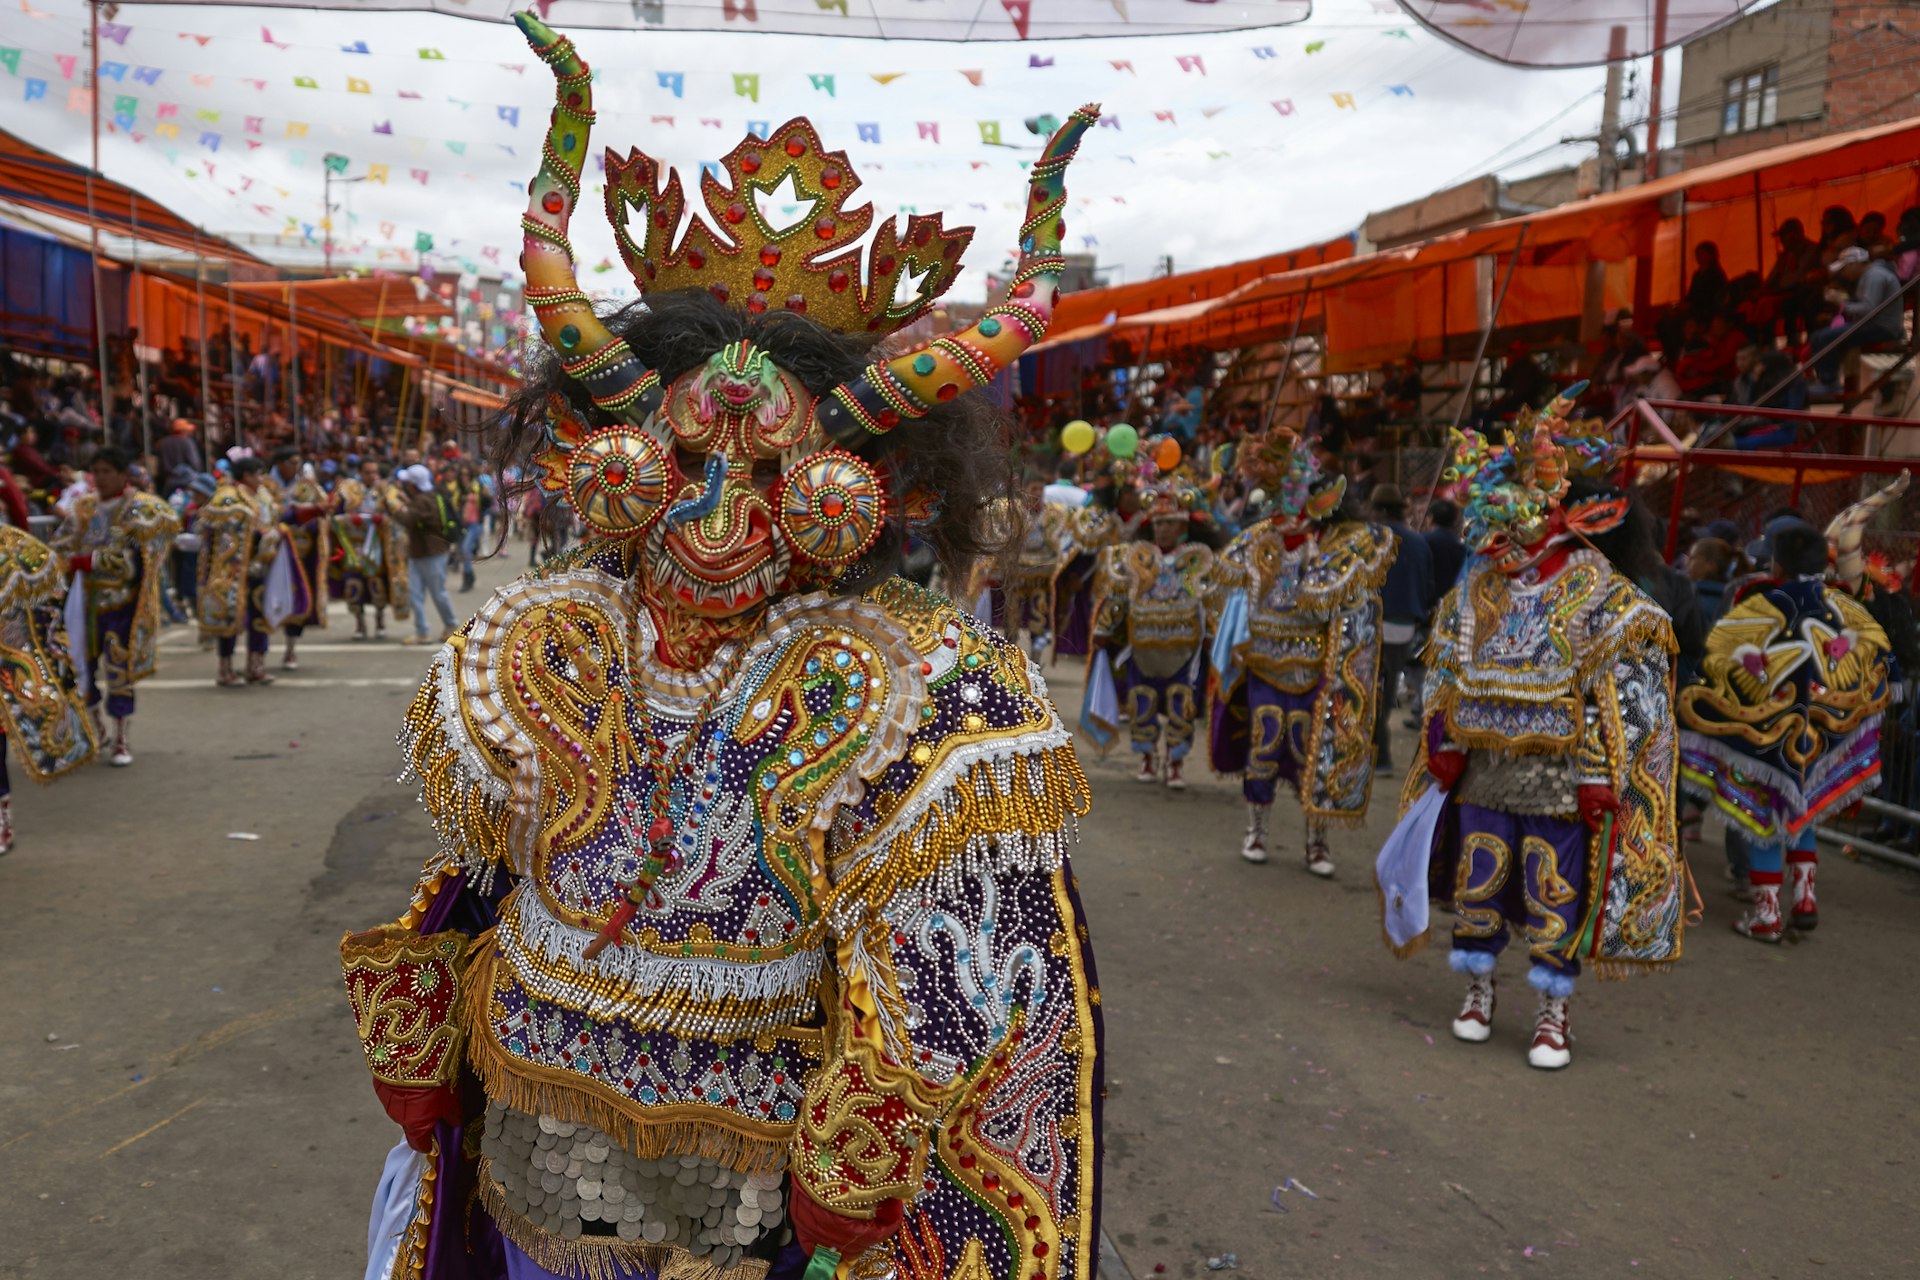 Diablada dancers in ornate costumes prepare to parade through the mining city of Oruro on the Altiplano of Bolivia during the annual carnival